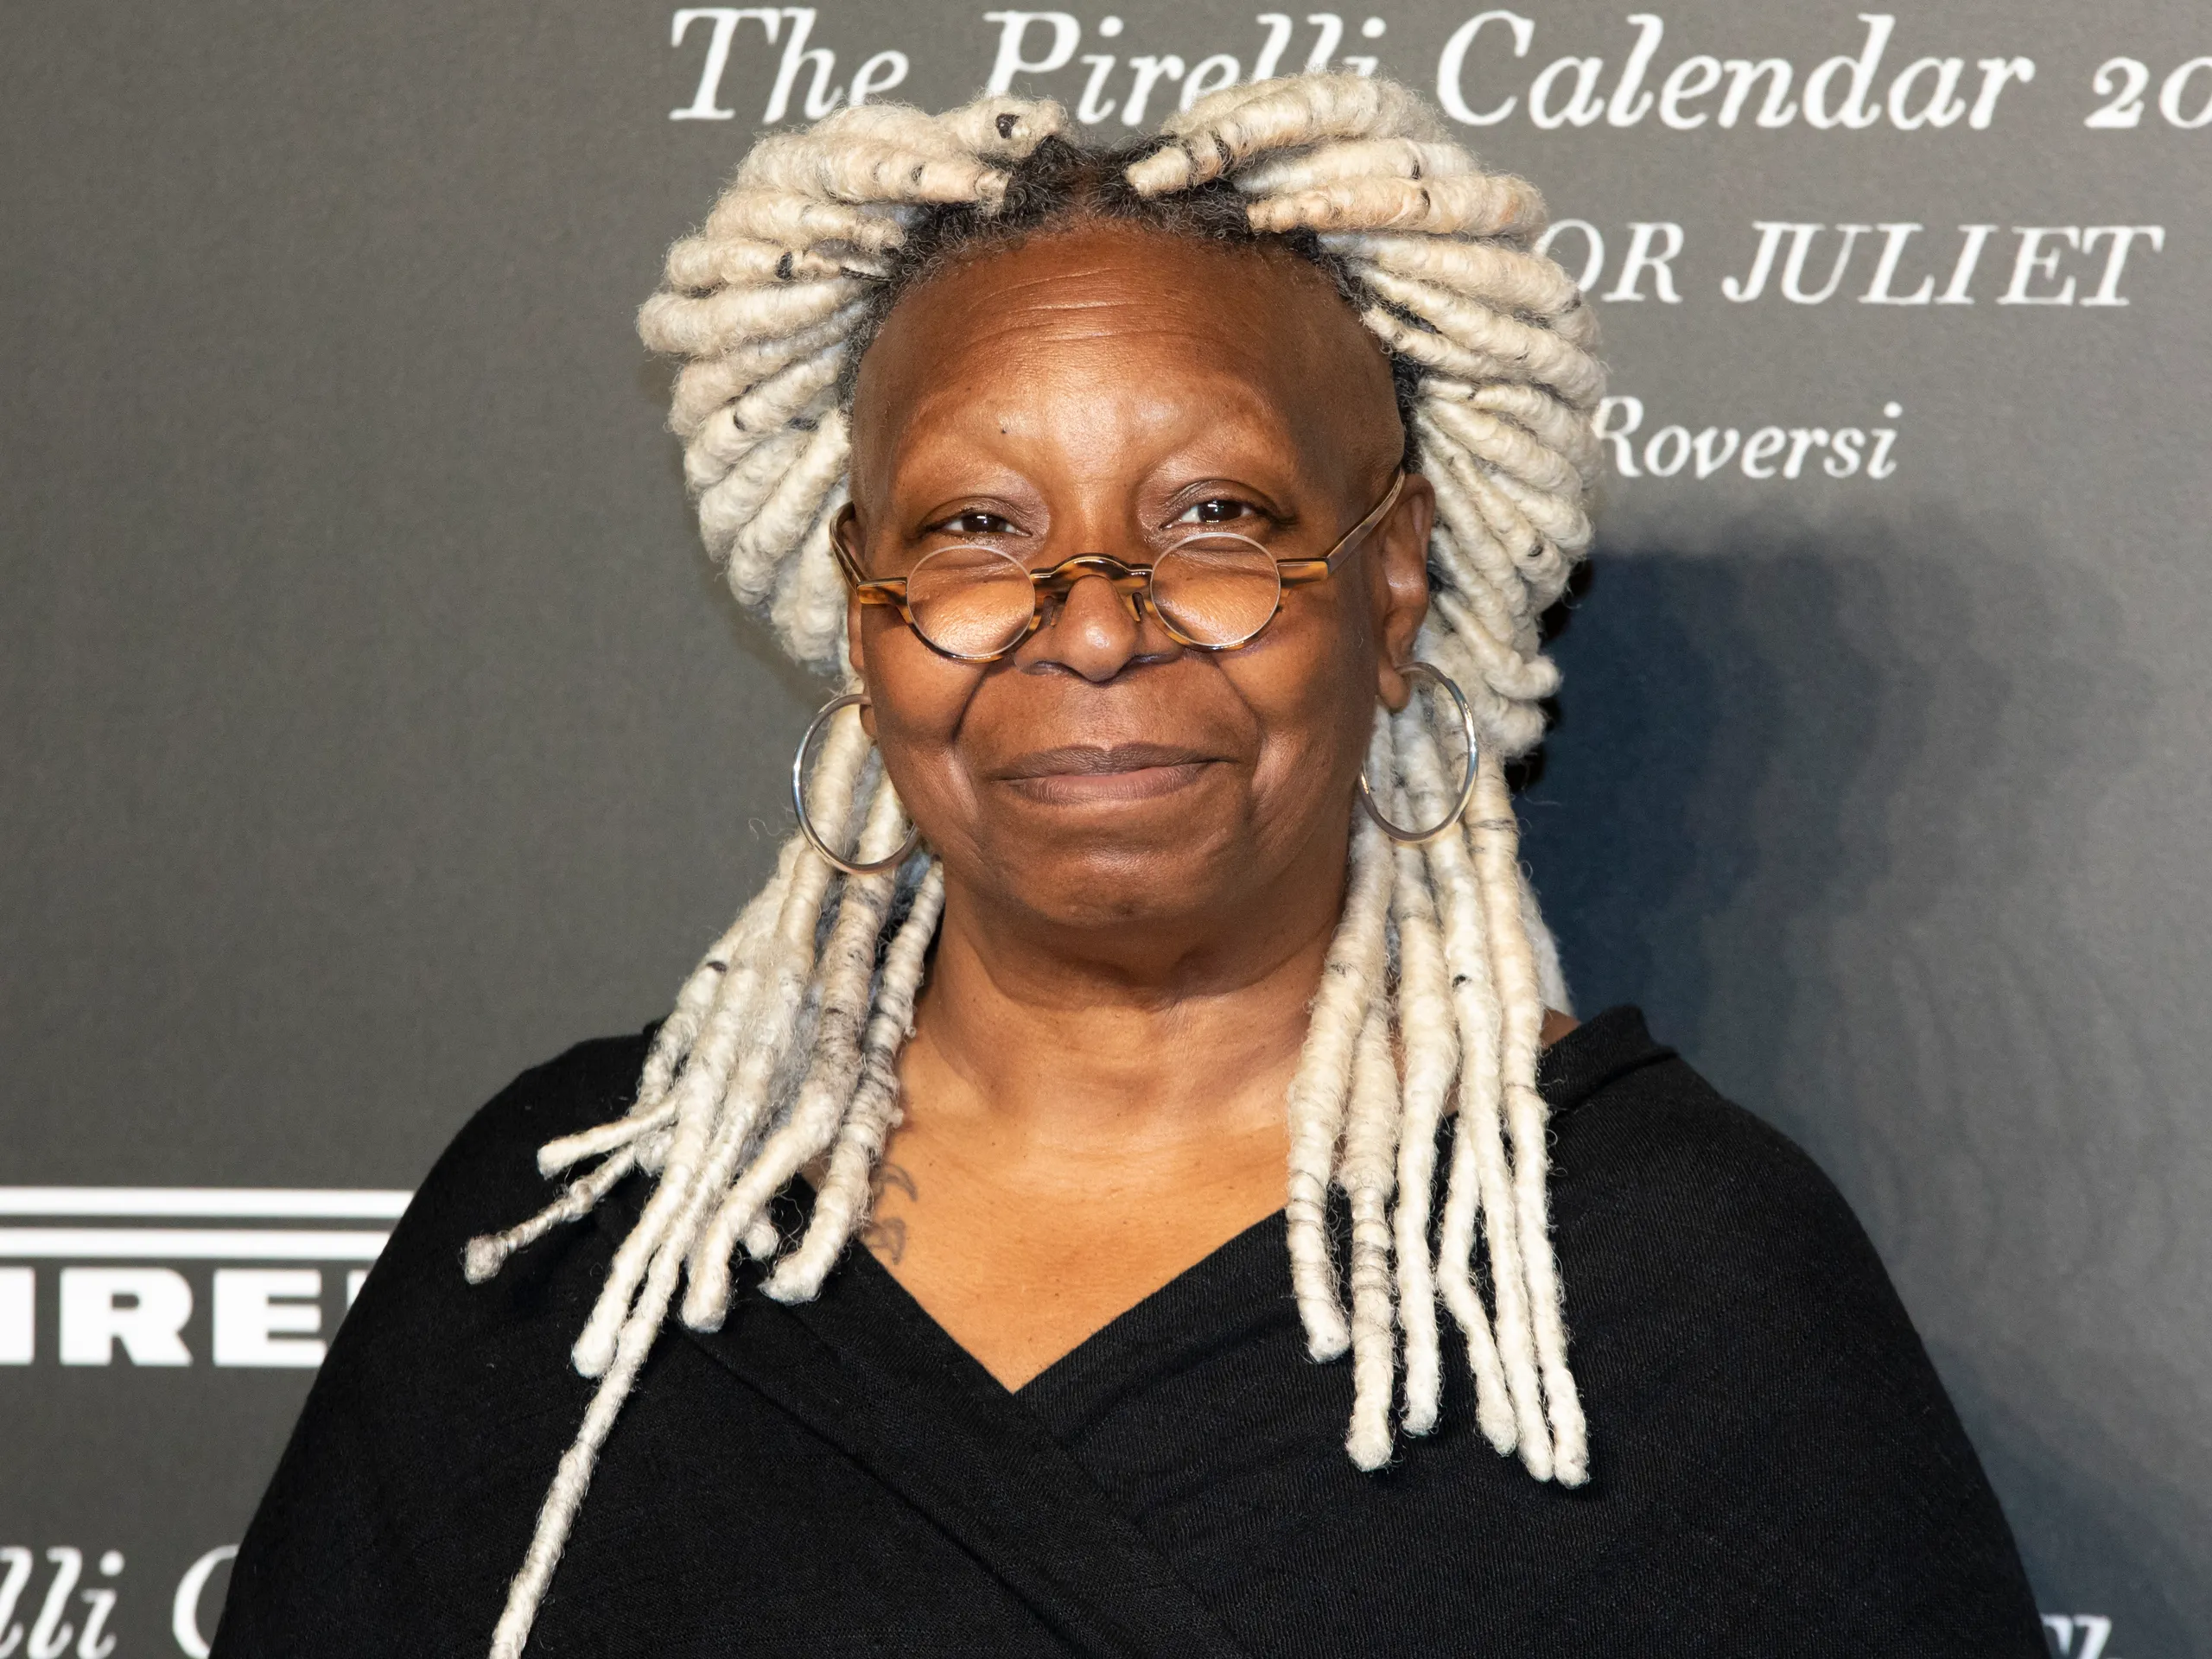 What was the first break Whoopi Goldberg received